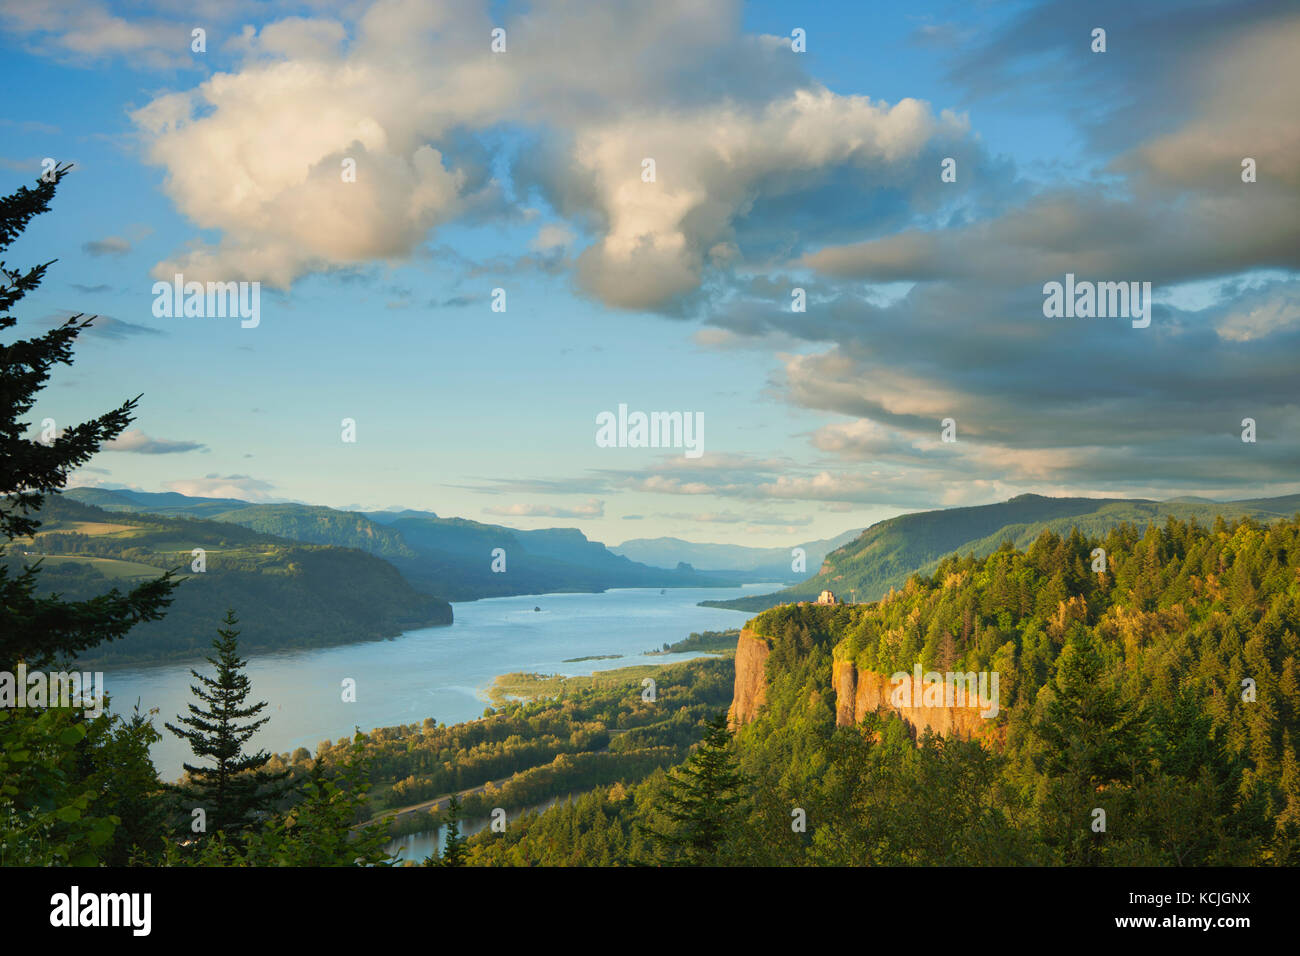 A view of the Columbia River Gorge at sunset Stock Photo